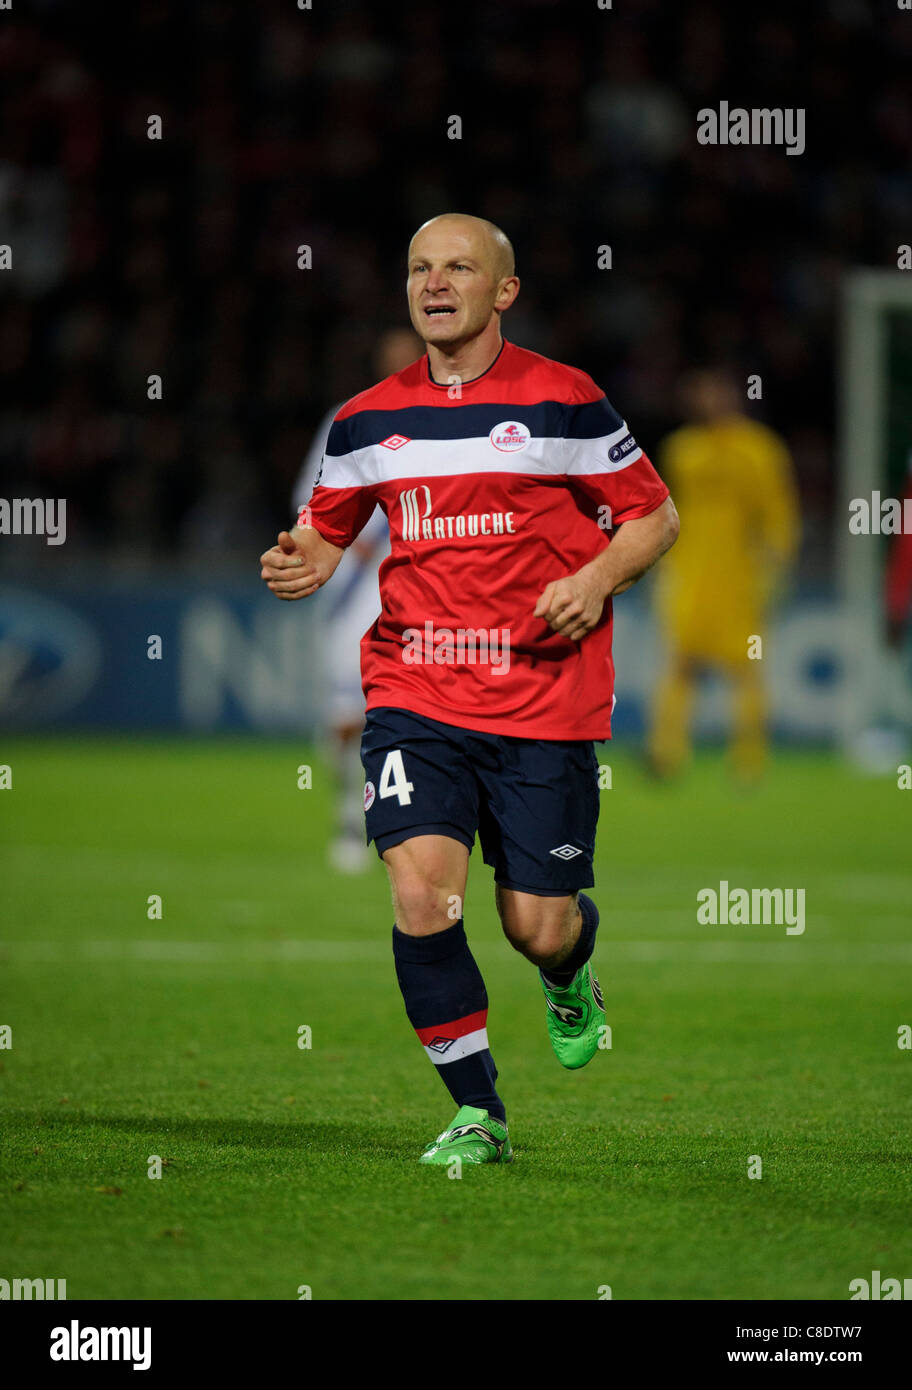 Florent BALMONT di Lille Olympique Sporting Club Foto Stock